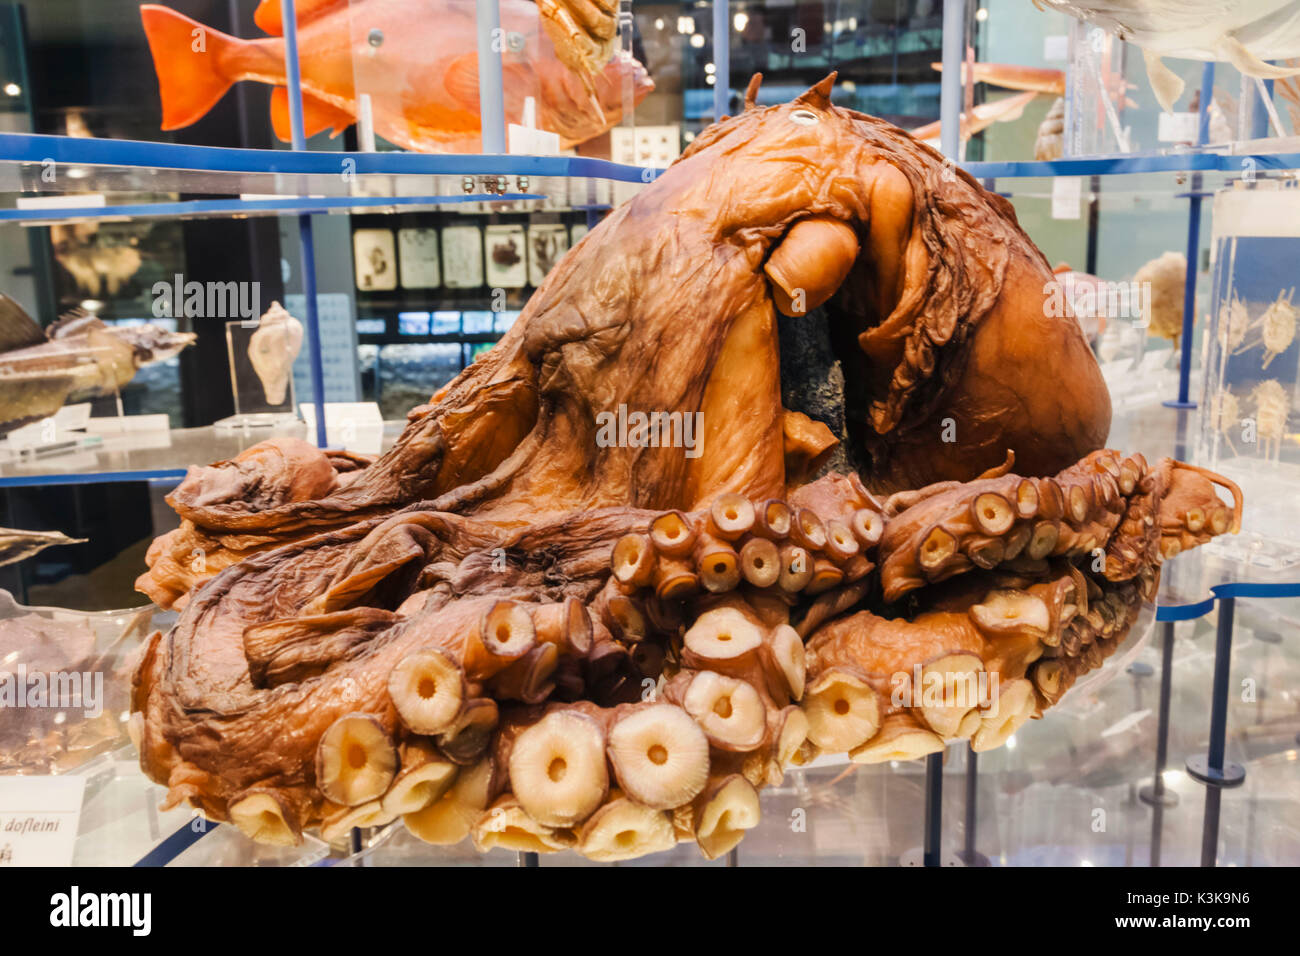 Japan, Hoshu, Tokyo, Ueno Park, National Museum of Nature and Science, Exhibit of Giant Octopus Stock Photo